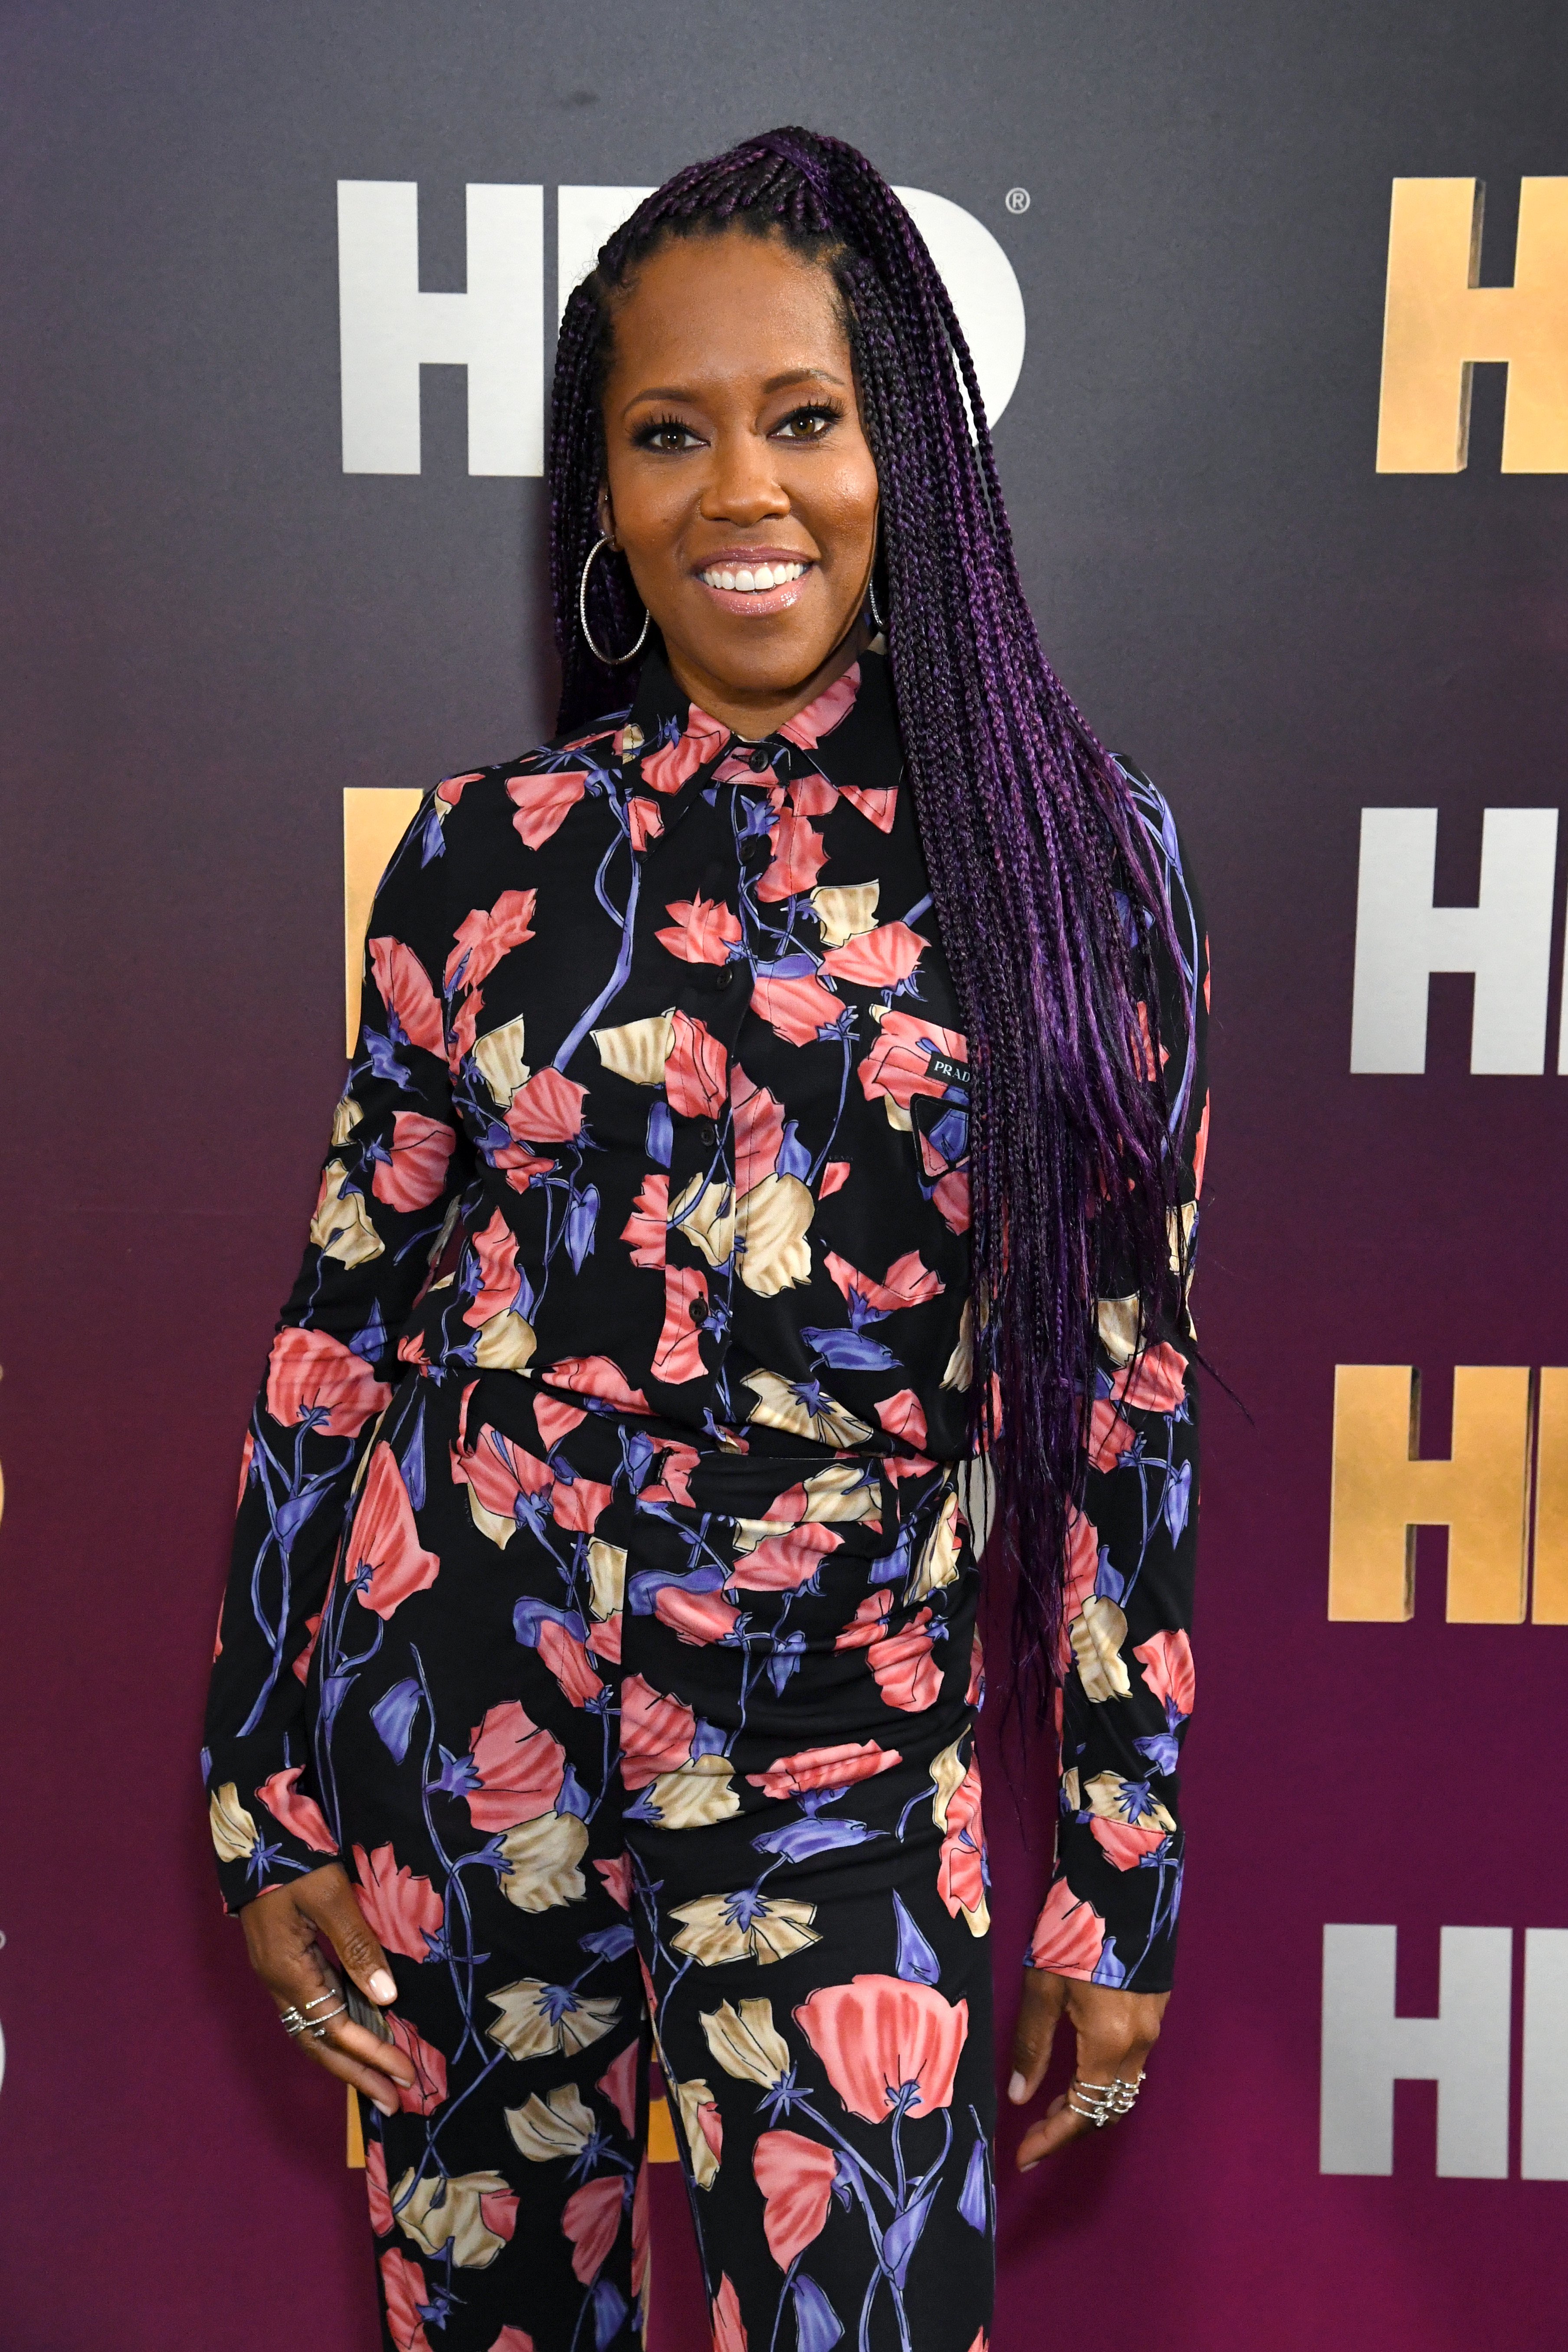 Regina King at the HBO Summer TCA Panels on July 24, 2019, in Beverly Hills. | Source: Getty Images